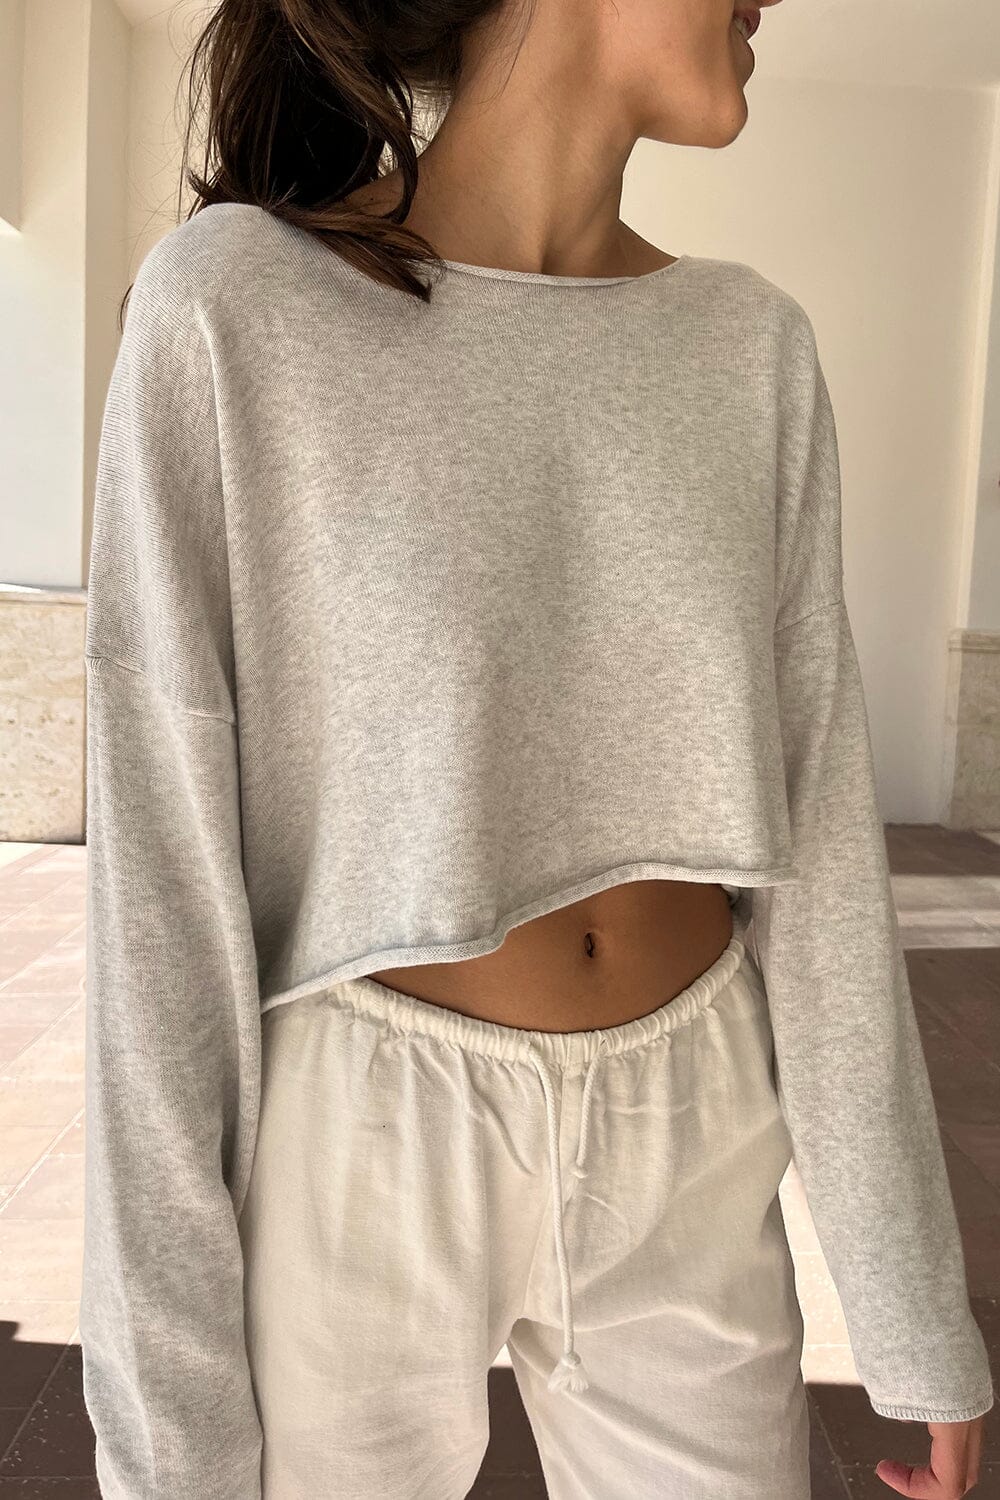 Brandy Melville, Sweaters, Black Cropped Sweater From Brandy Melville